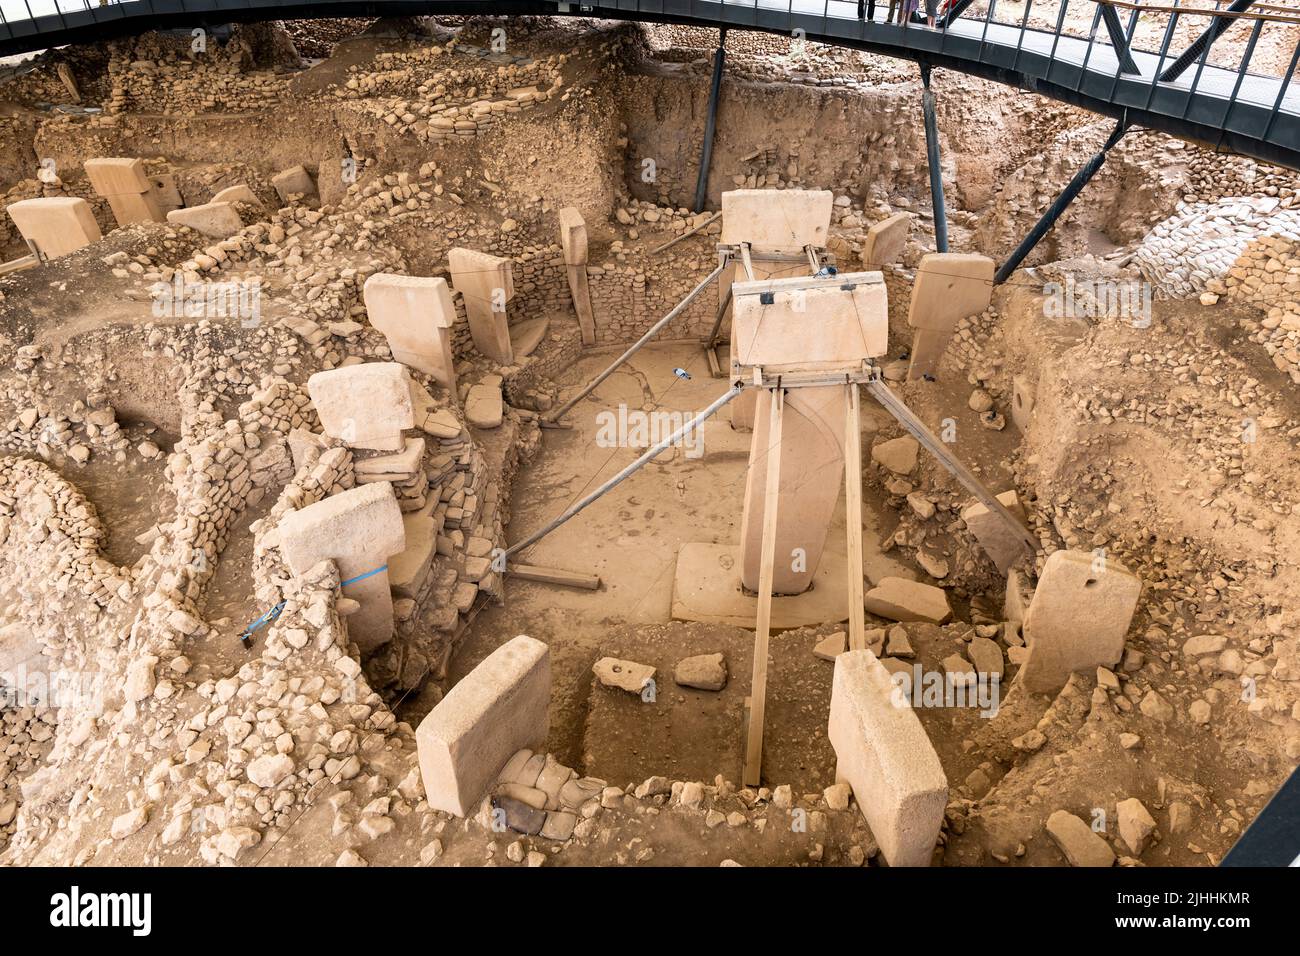 Göbeklitepe (Gobeklitepe in English), a Neolithic archaeological site near the city of Sanliurfa in Turkey. It is the world's oldest known temple and Stock Photo